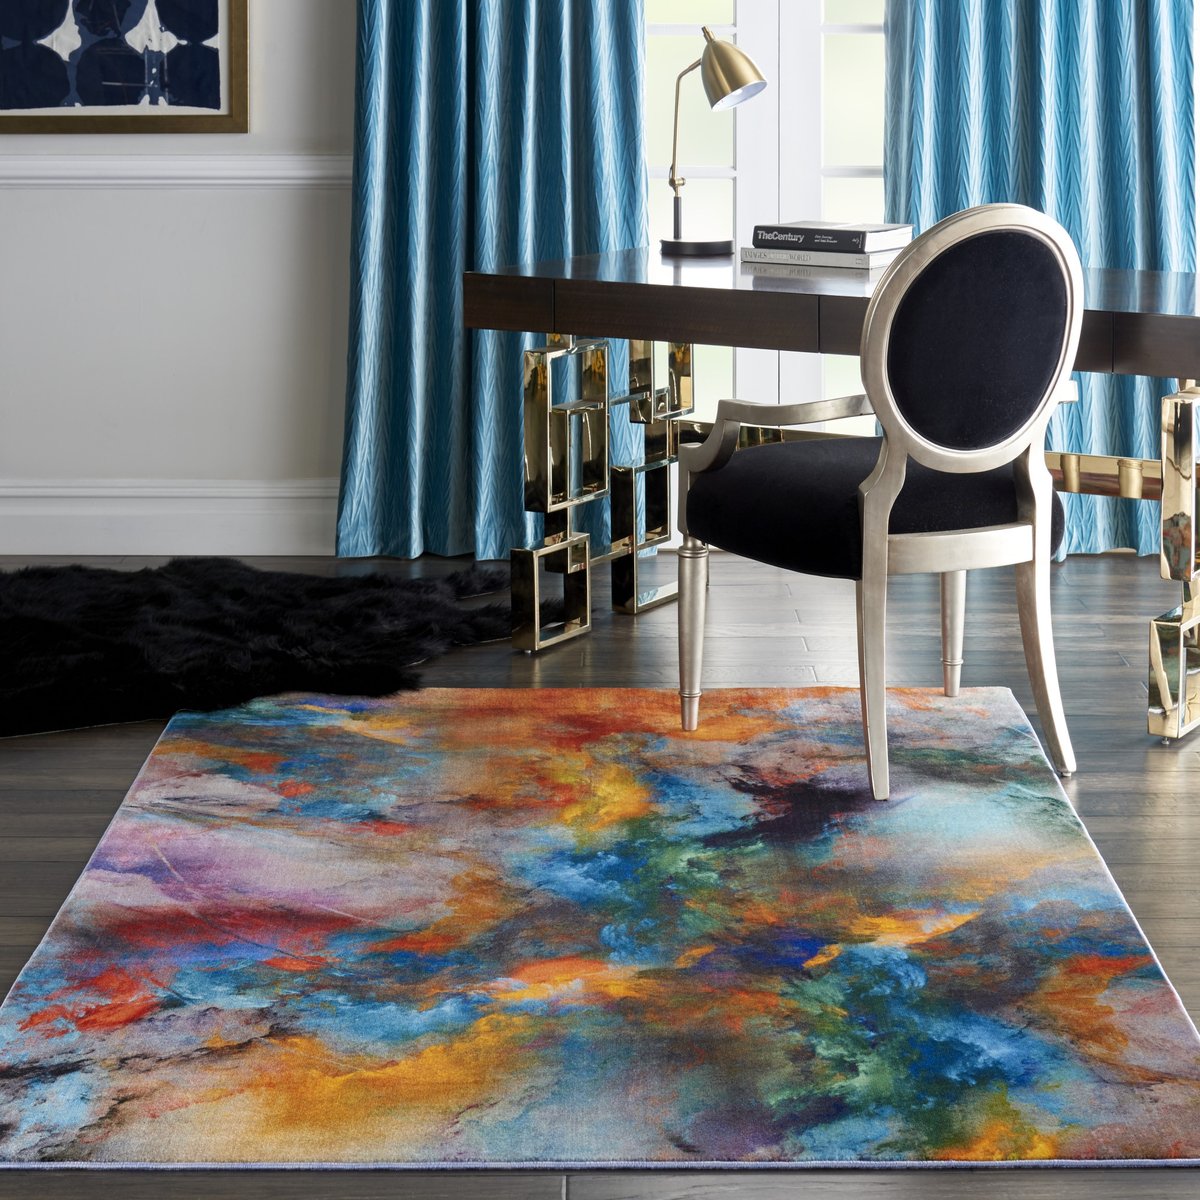 Captivating Colors Office Rug Ideas